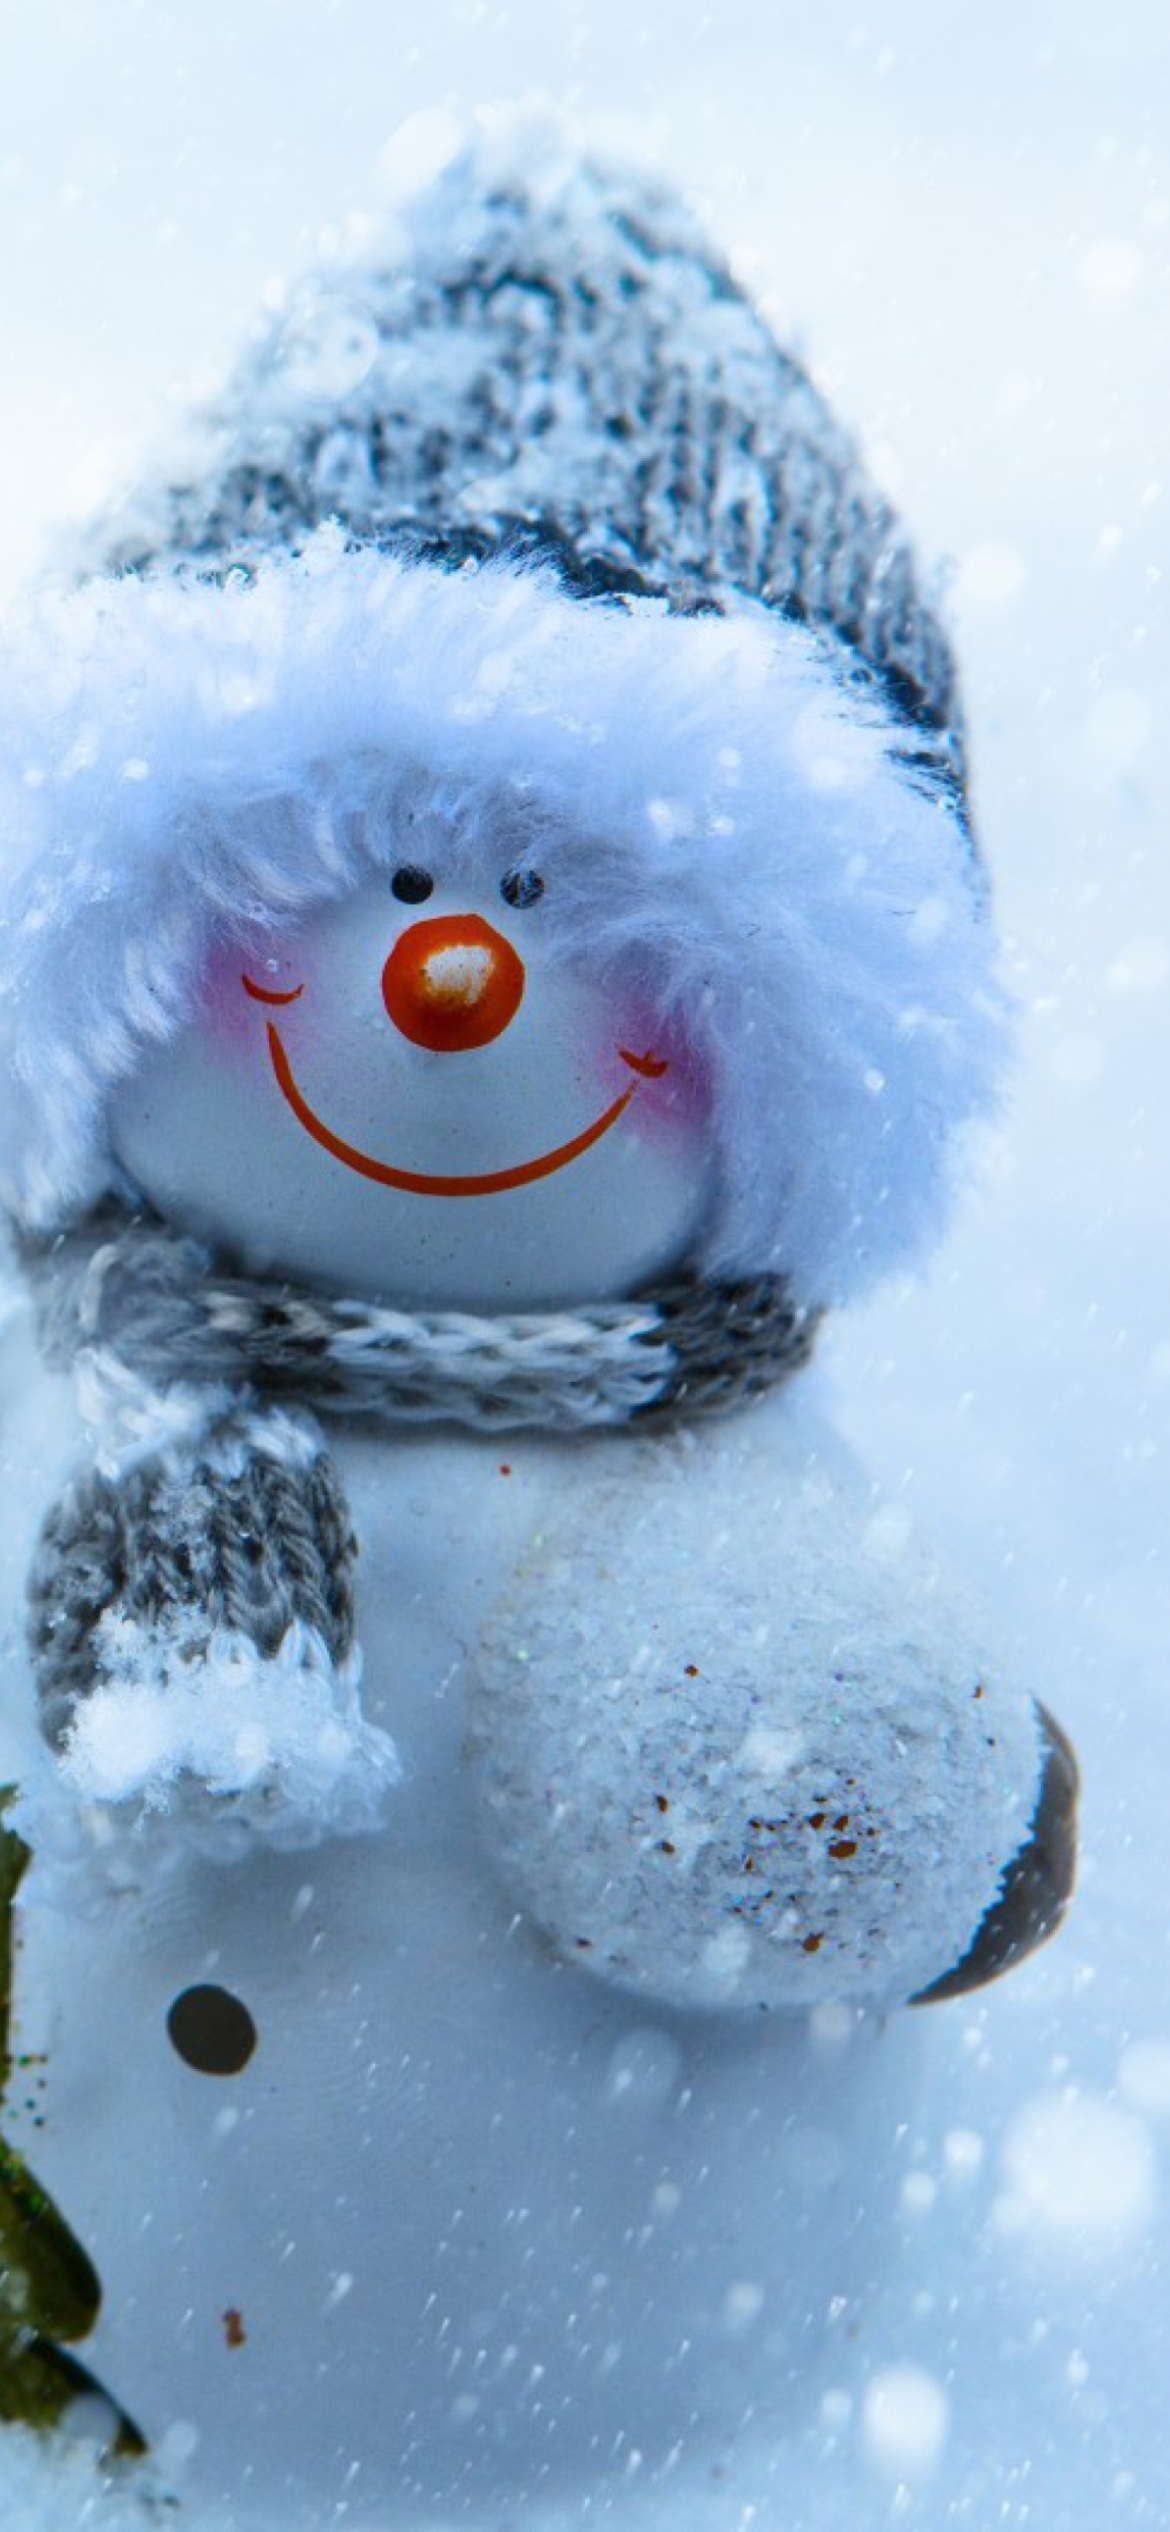 Das Snowman Covered With Snowflakes Wallpaper 1170x2532